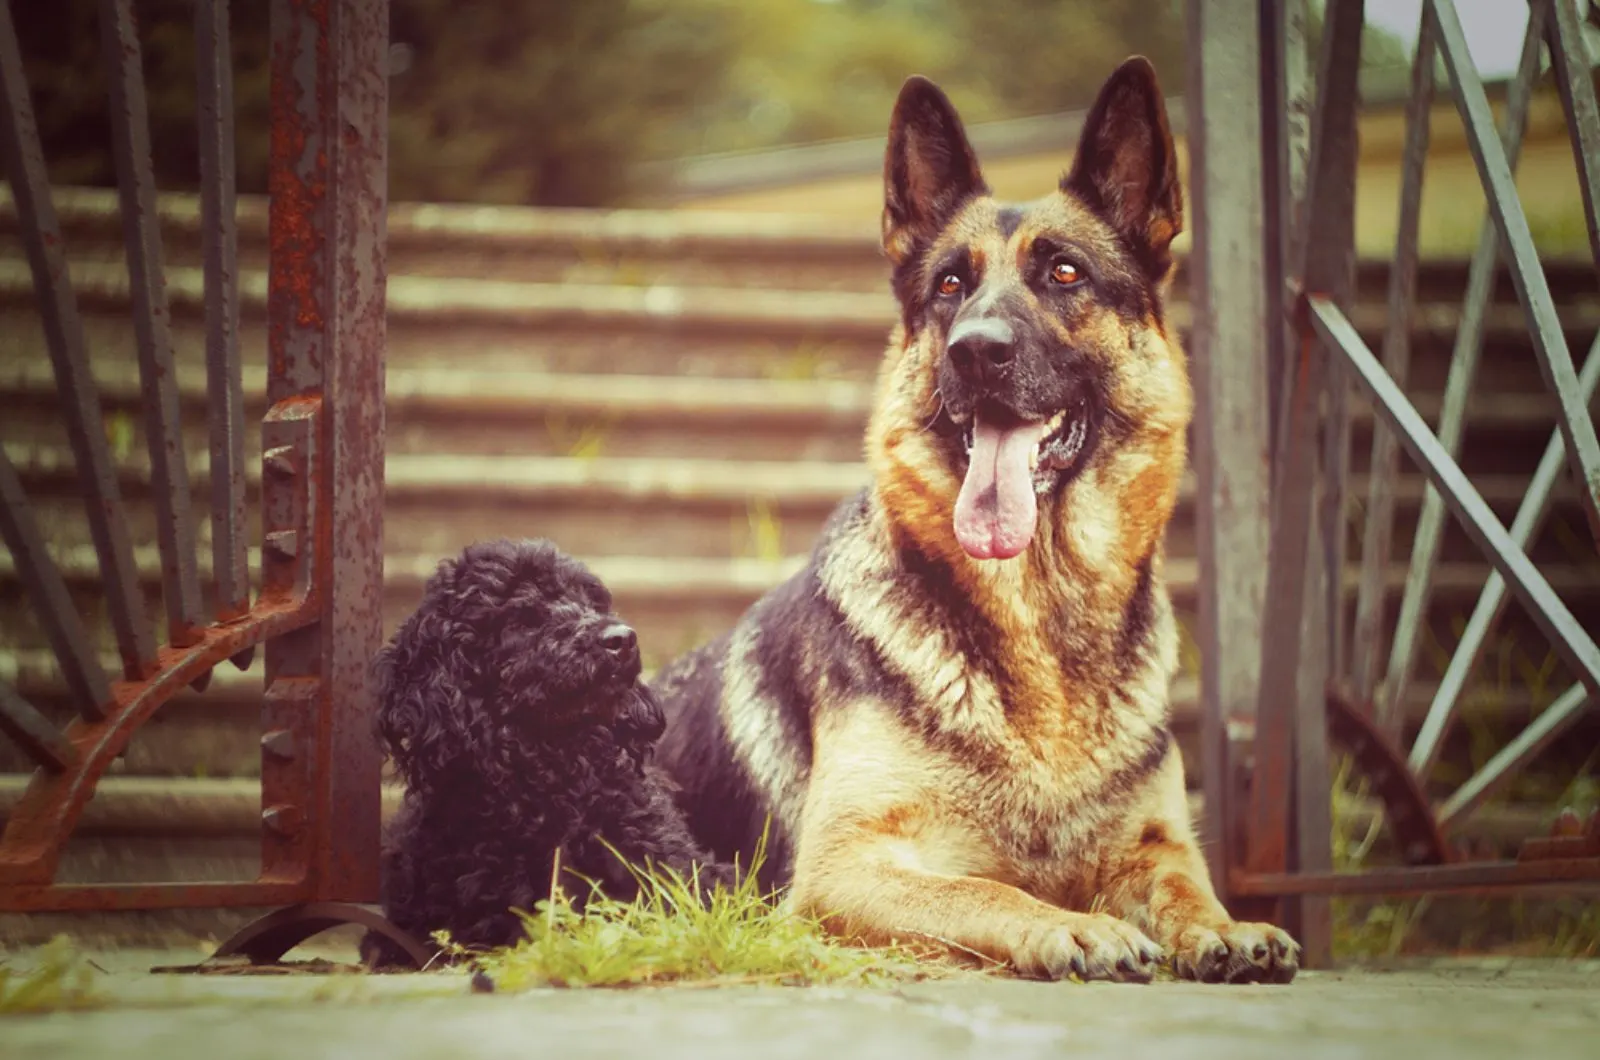 german shepherd dog with poodle puppy sitting near the gate